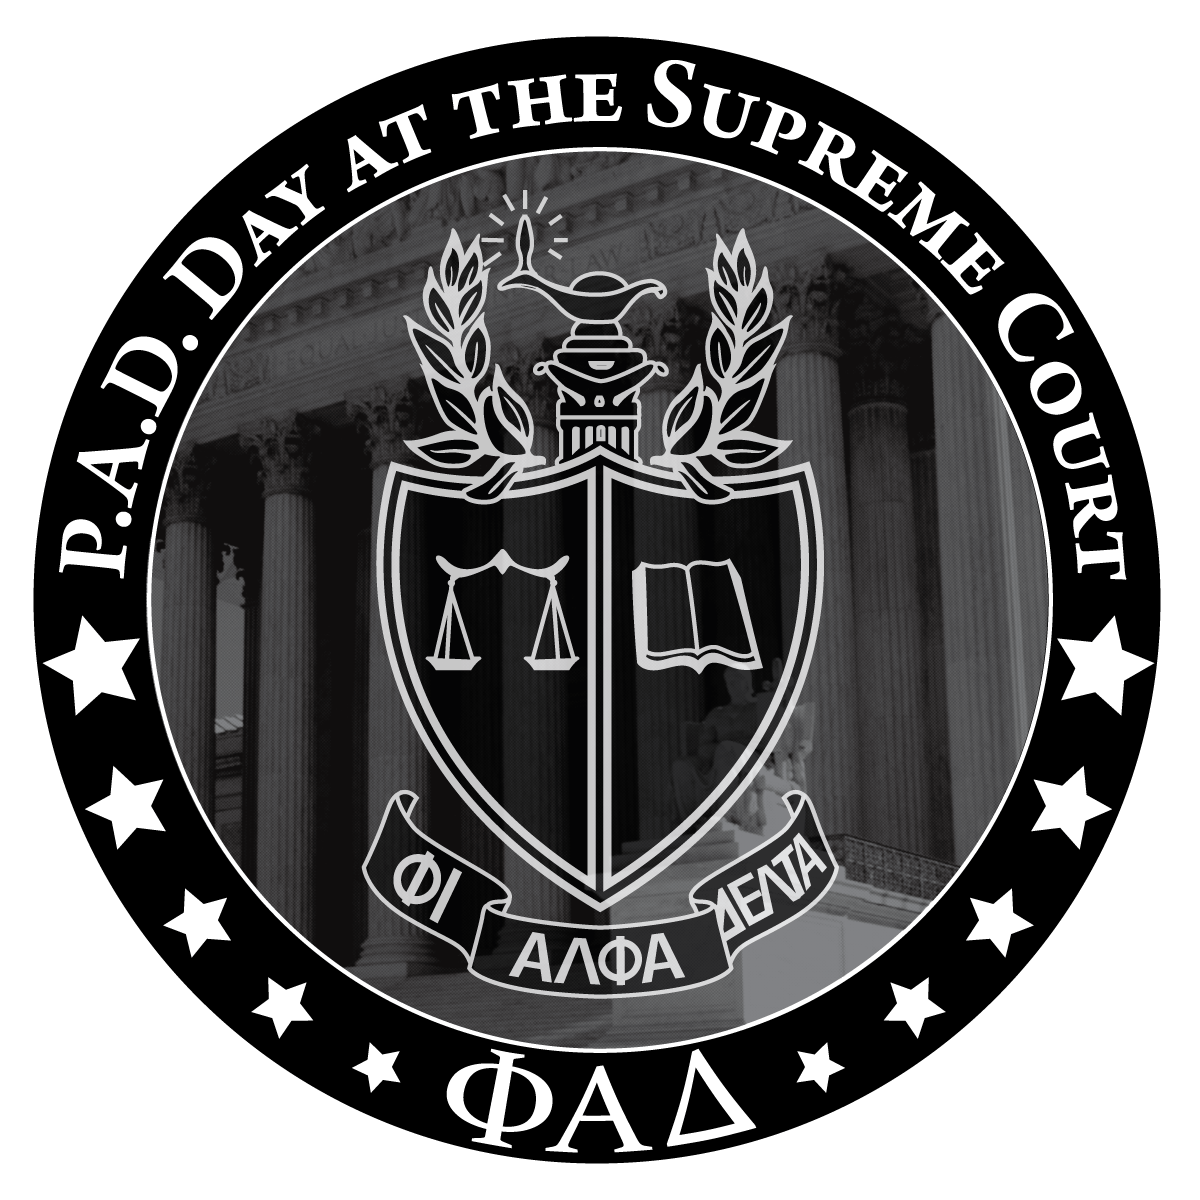 SCOTUS Logo - 52nd Annual P.A.D. Day at the Supreme Court of the United States ...